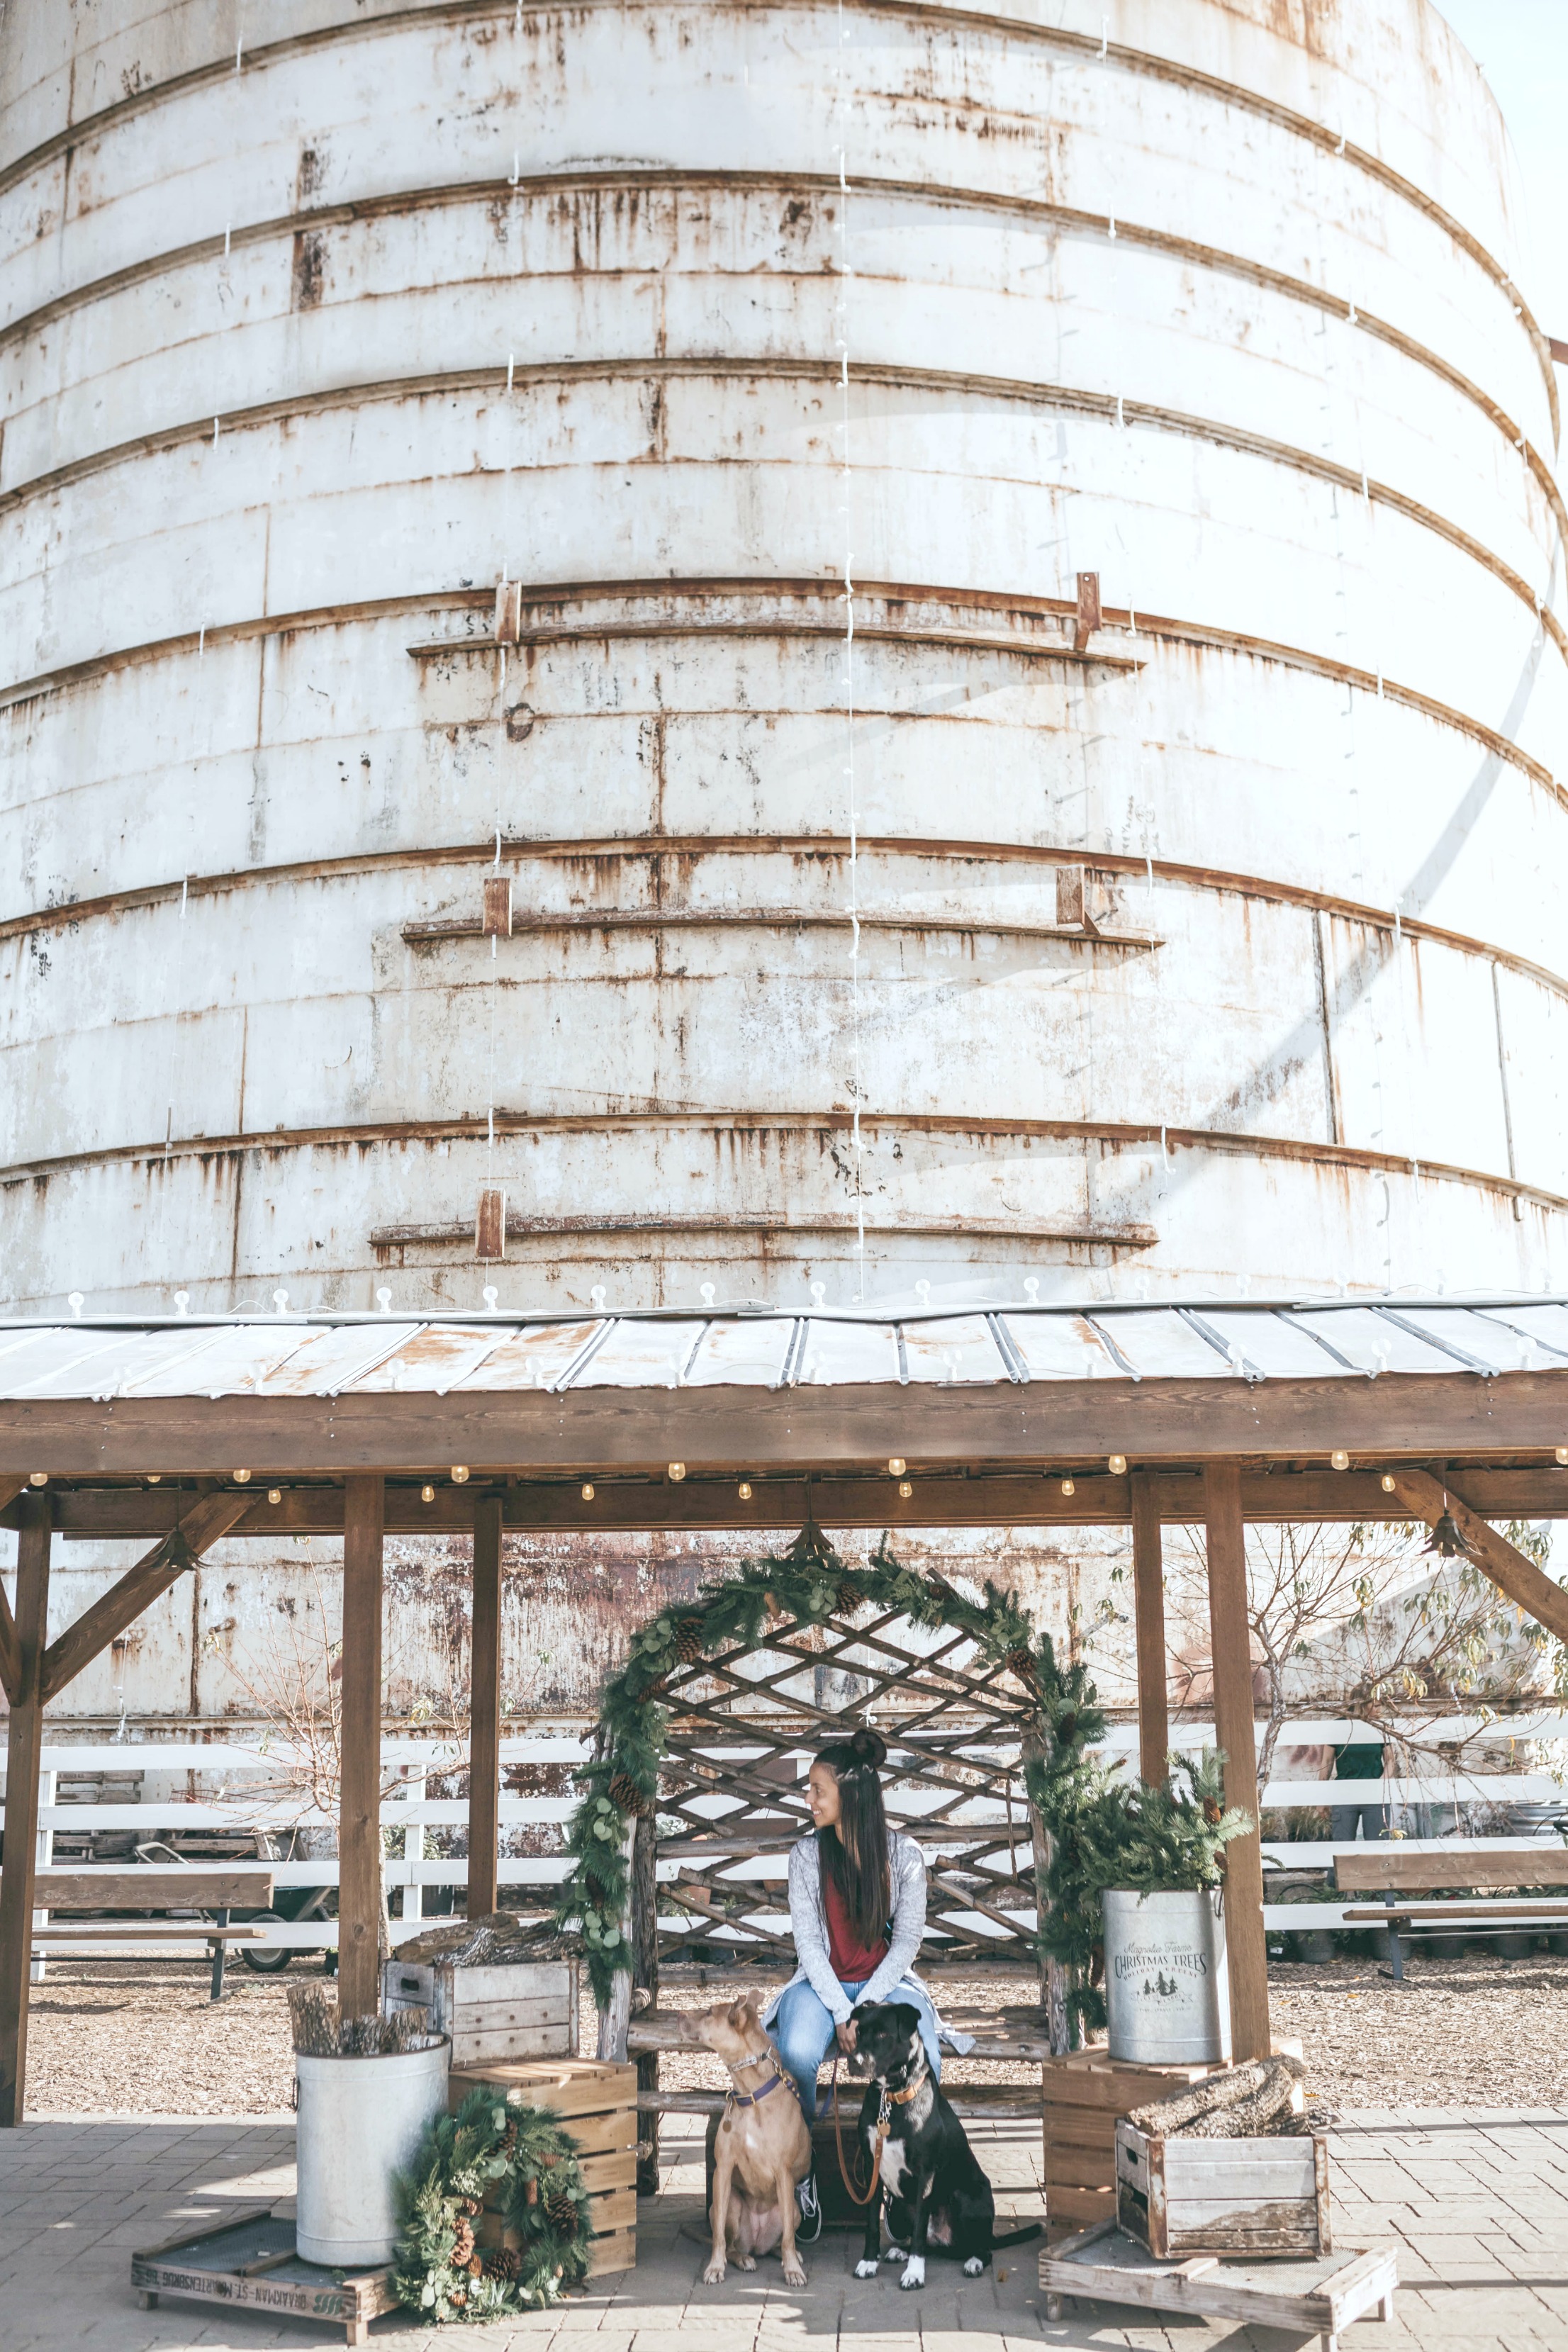 A silo is behind a woman selling wreaths and other greenery. Steel buildings on a rural property.